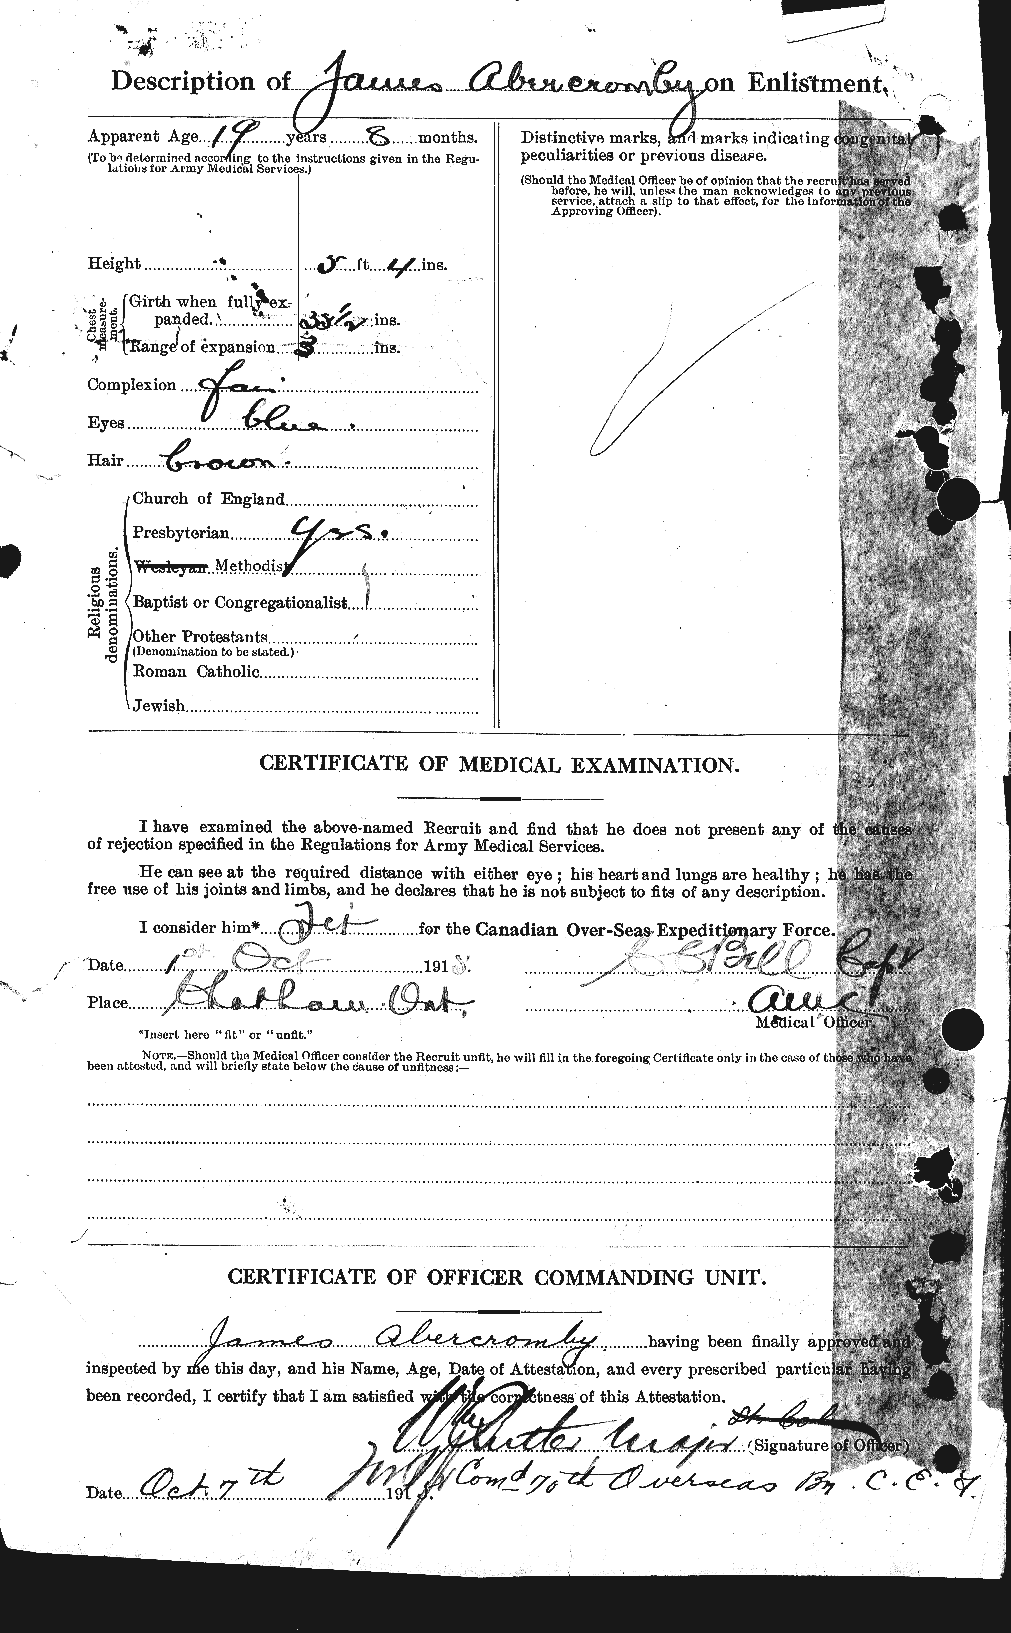 Personnel Records of the First World War - CEF 201493b